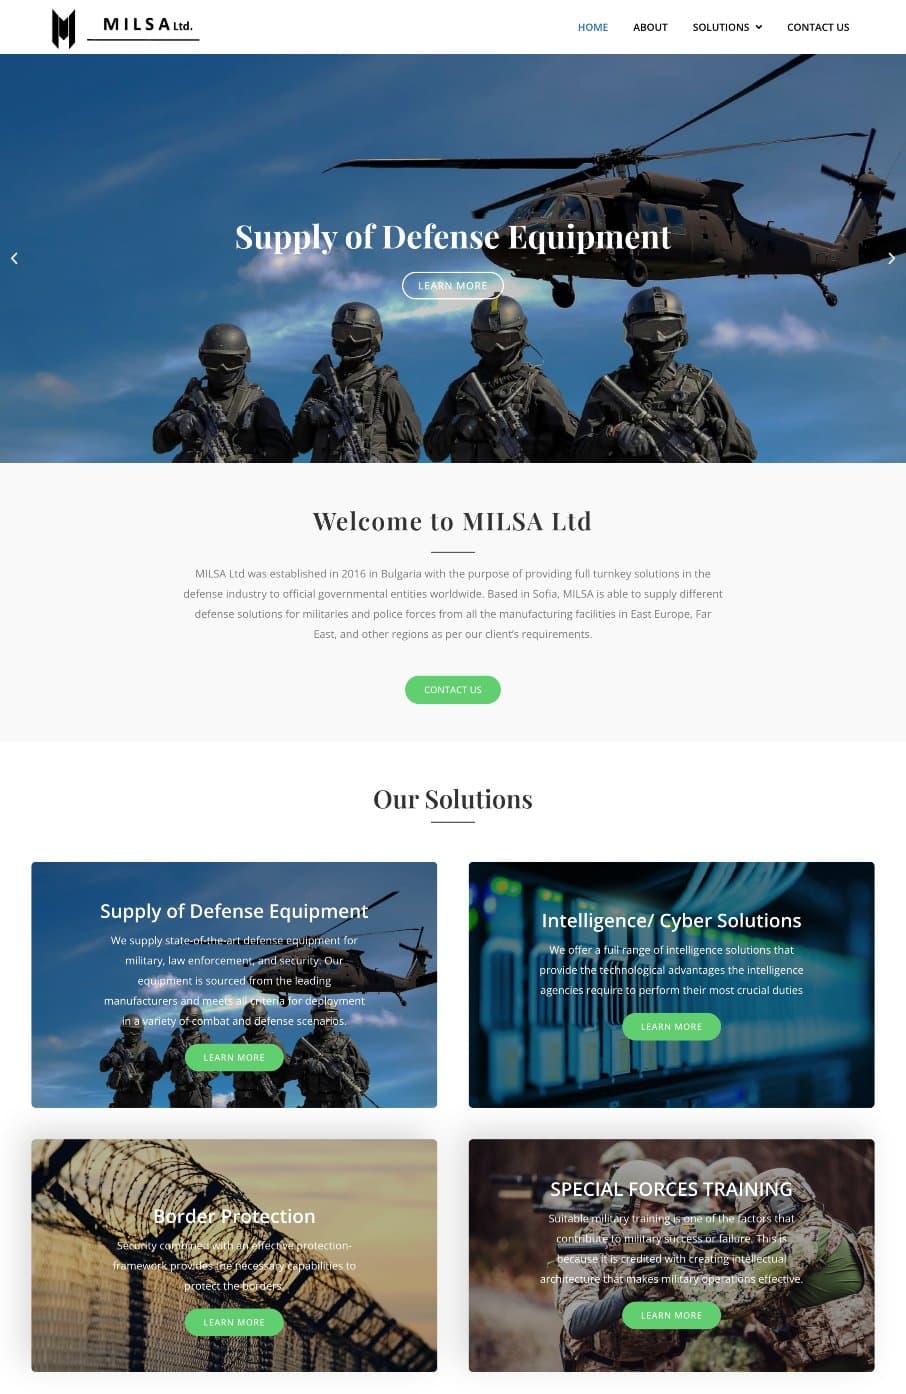 website design for Defense Equipment supplier company by only_hafiz